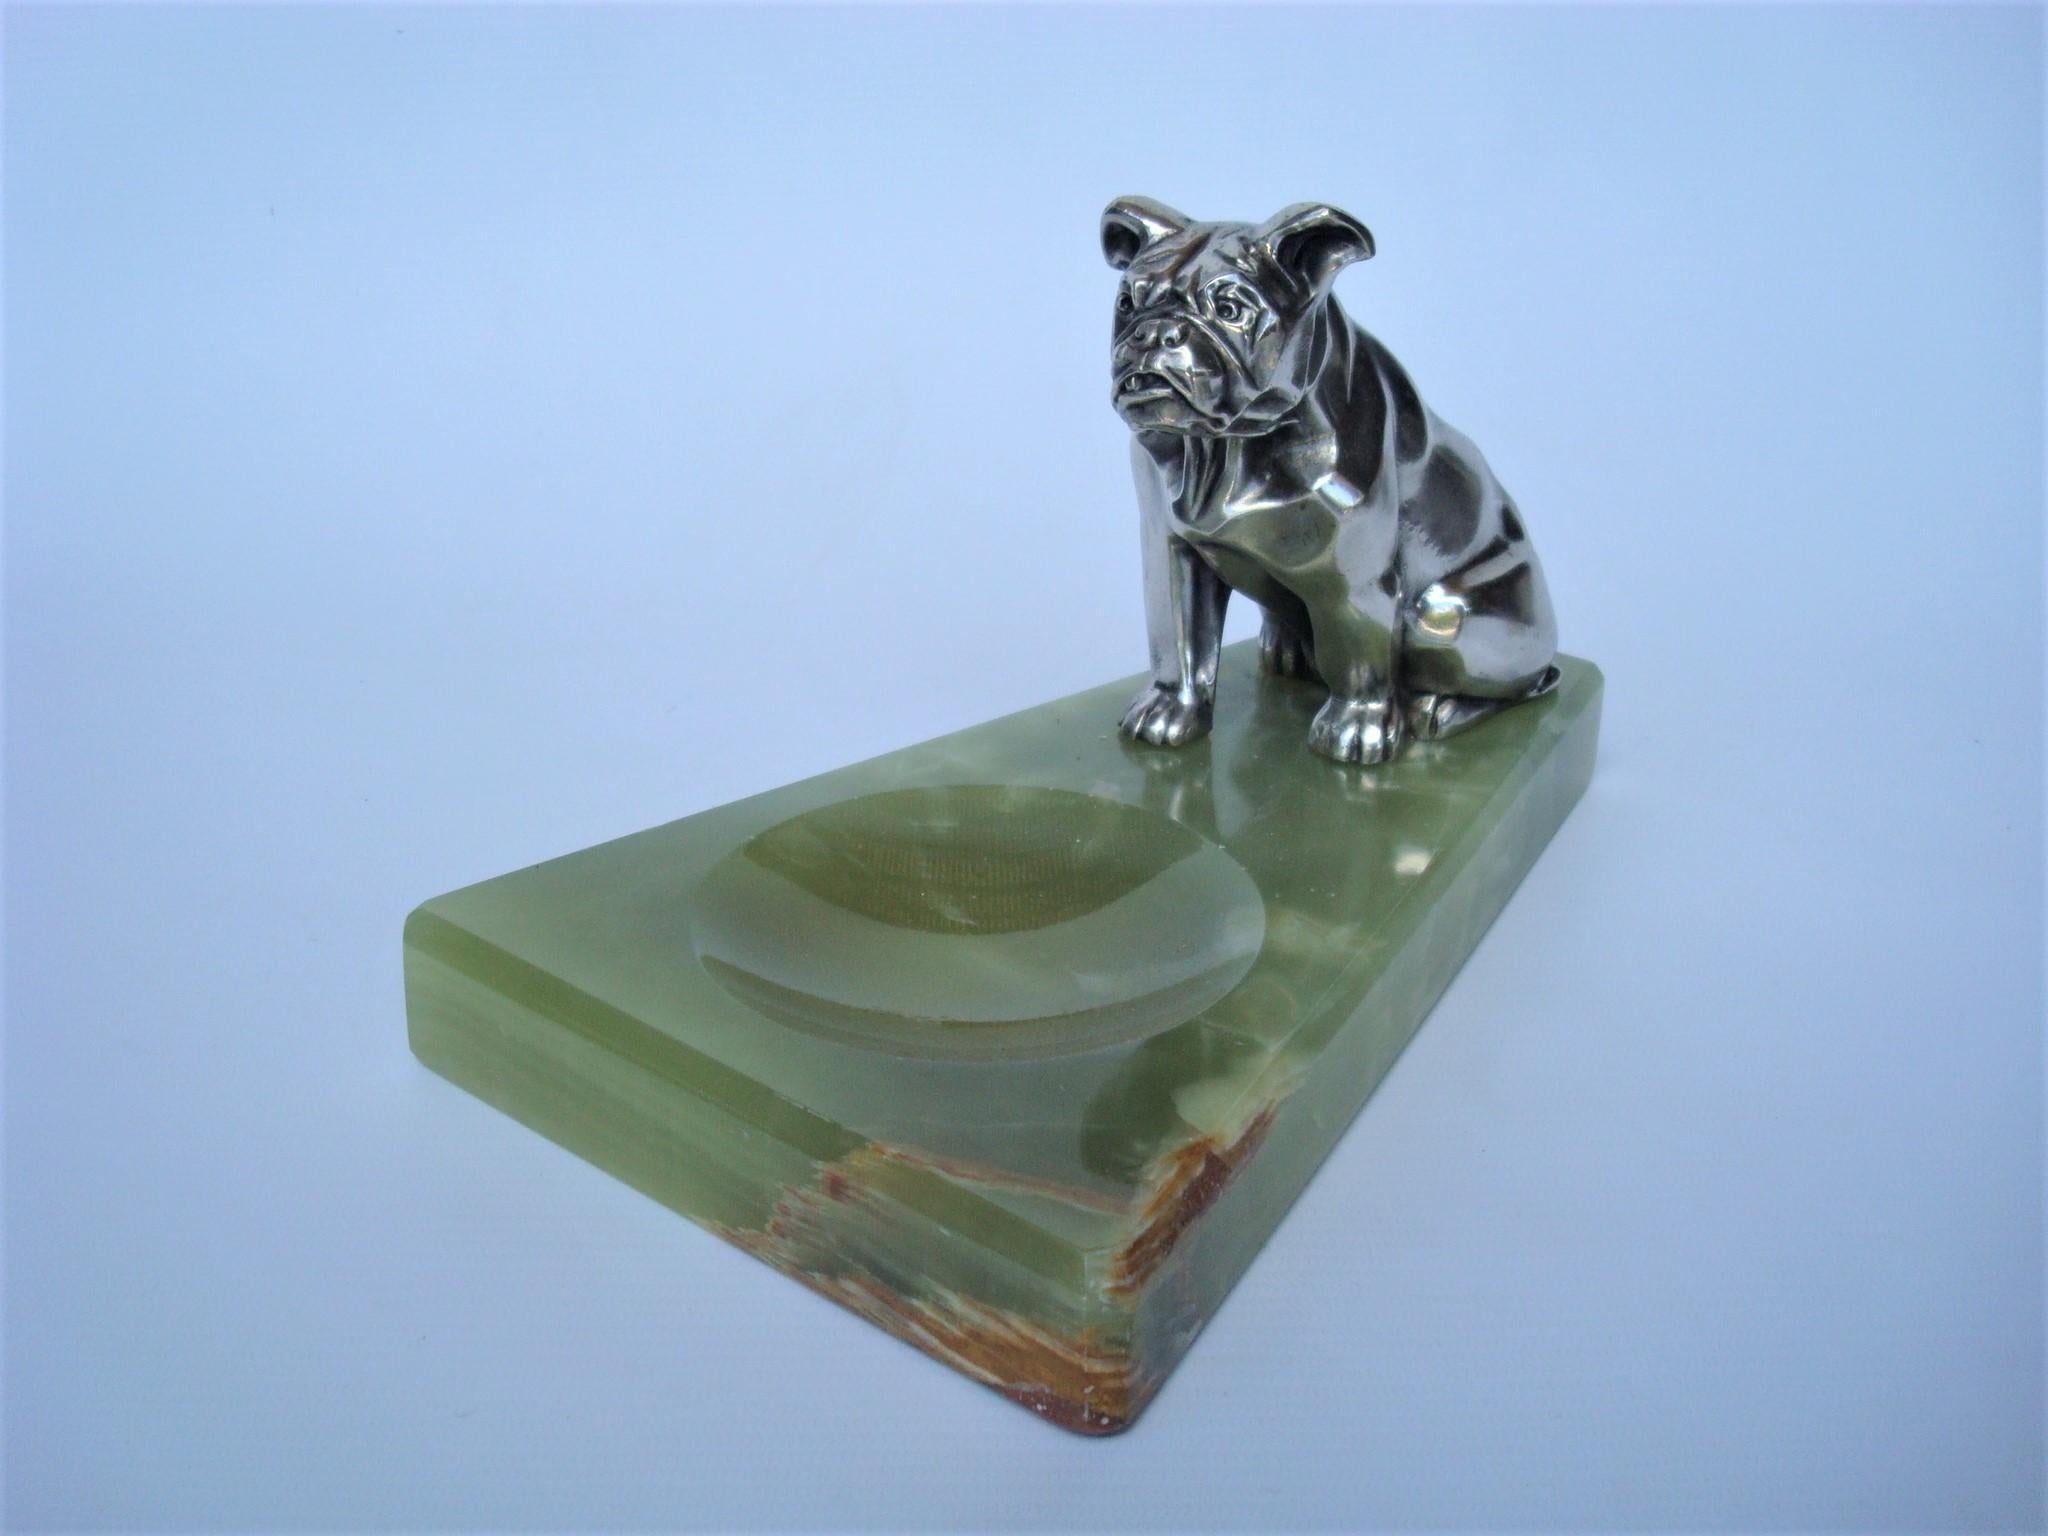 Art Deco Silvered Metal Sculpture of a sitting Bulldog Ashtray or Jewelry dish. By Irene´e Rochard. 
Signed Rochard. Art Deco Style. Made in France 1930´s. Silvered metal. Onyx Base.